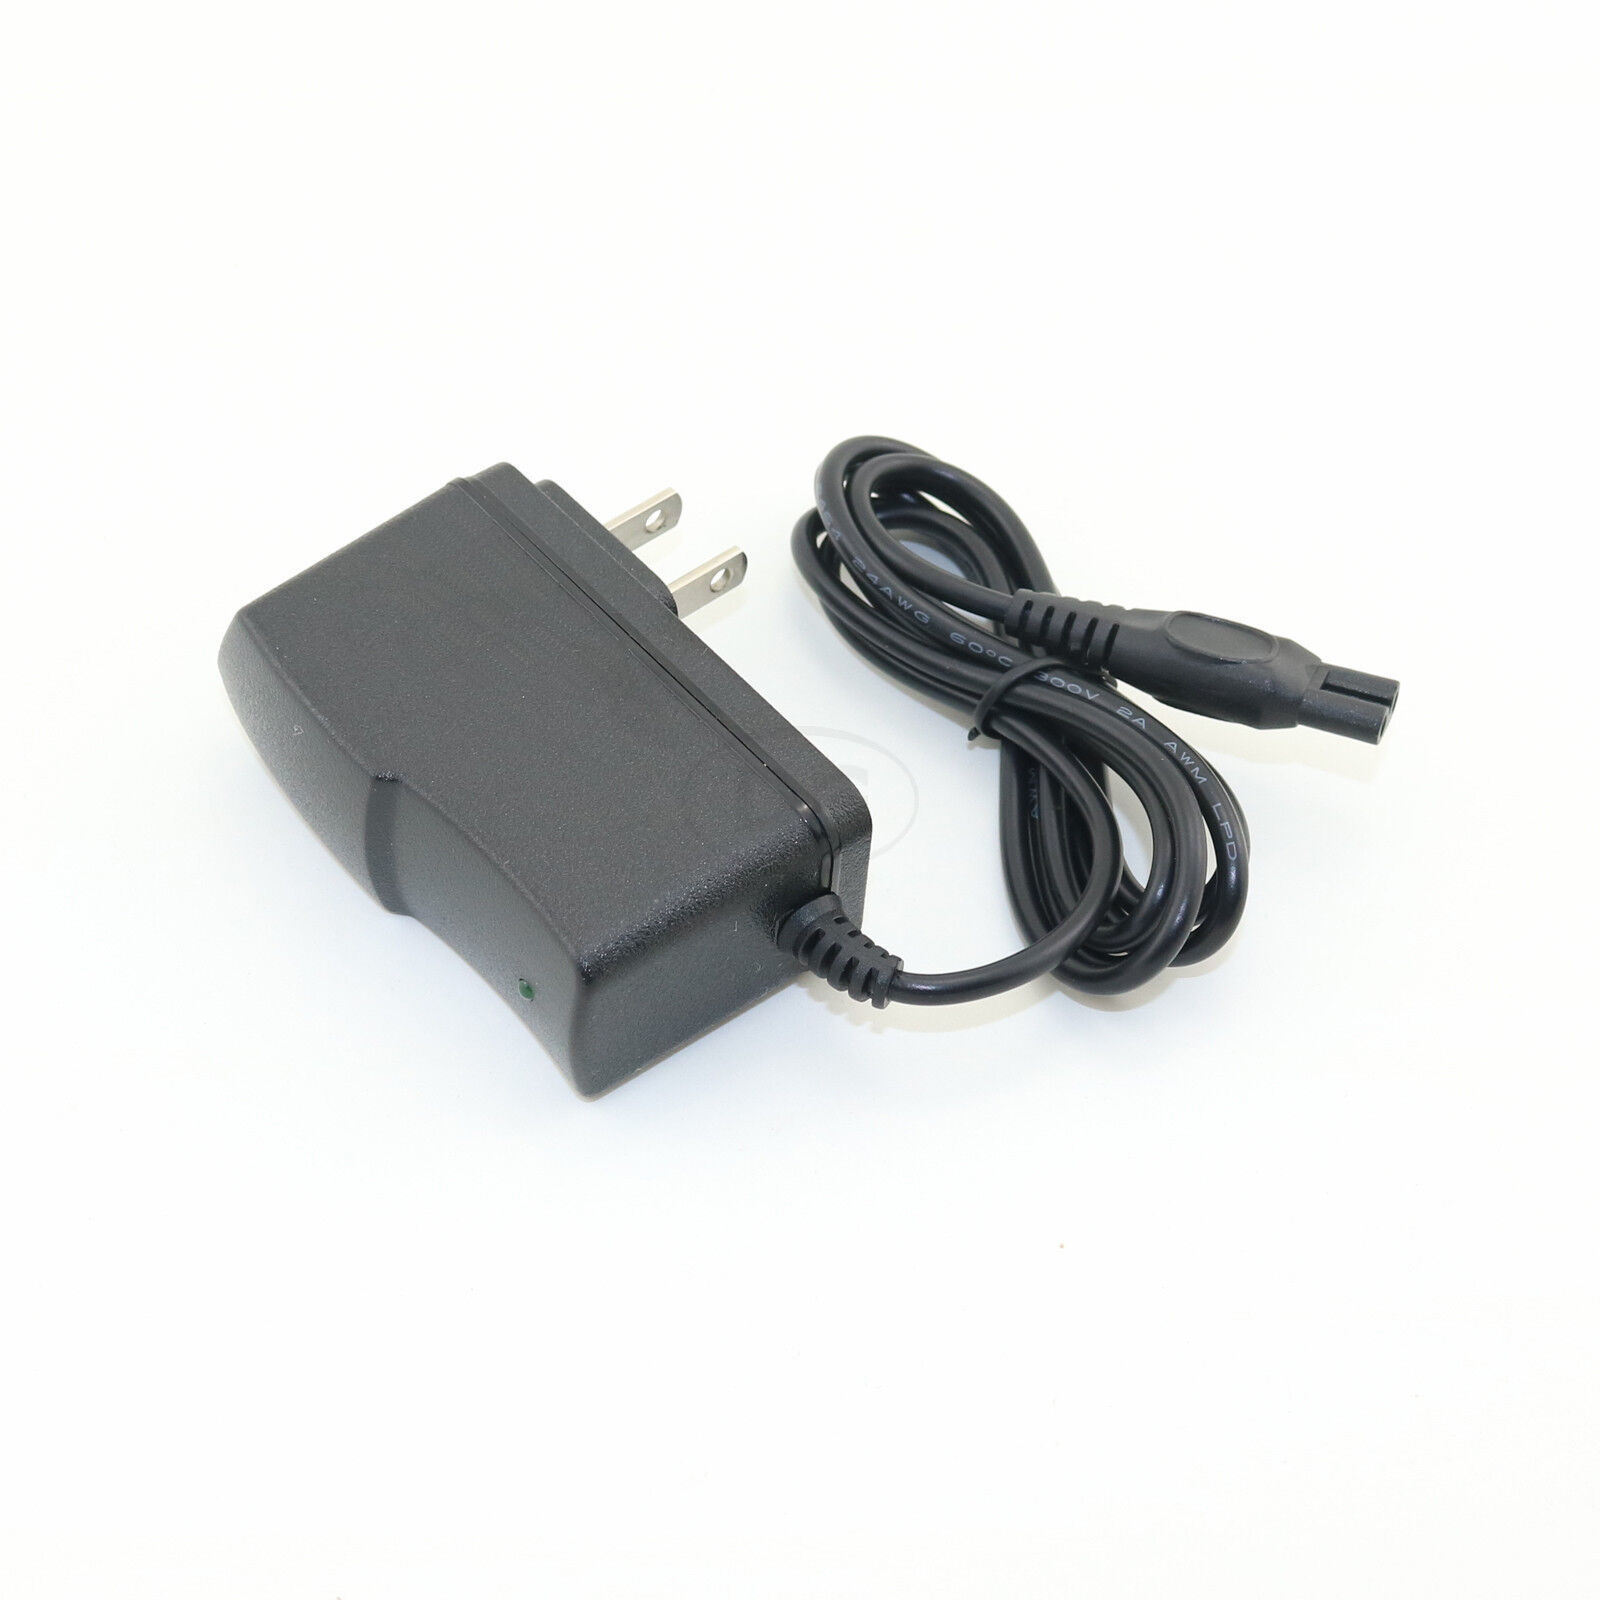 Primary image for Charger Cord For Philips Norelco At920 At921 At926 Rq12 At891 At895 At896